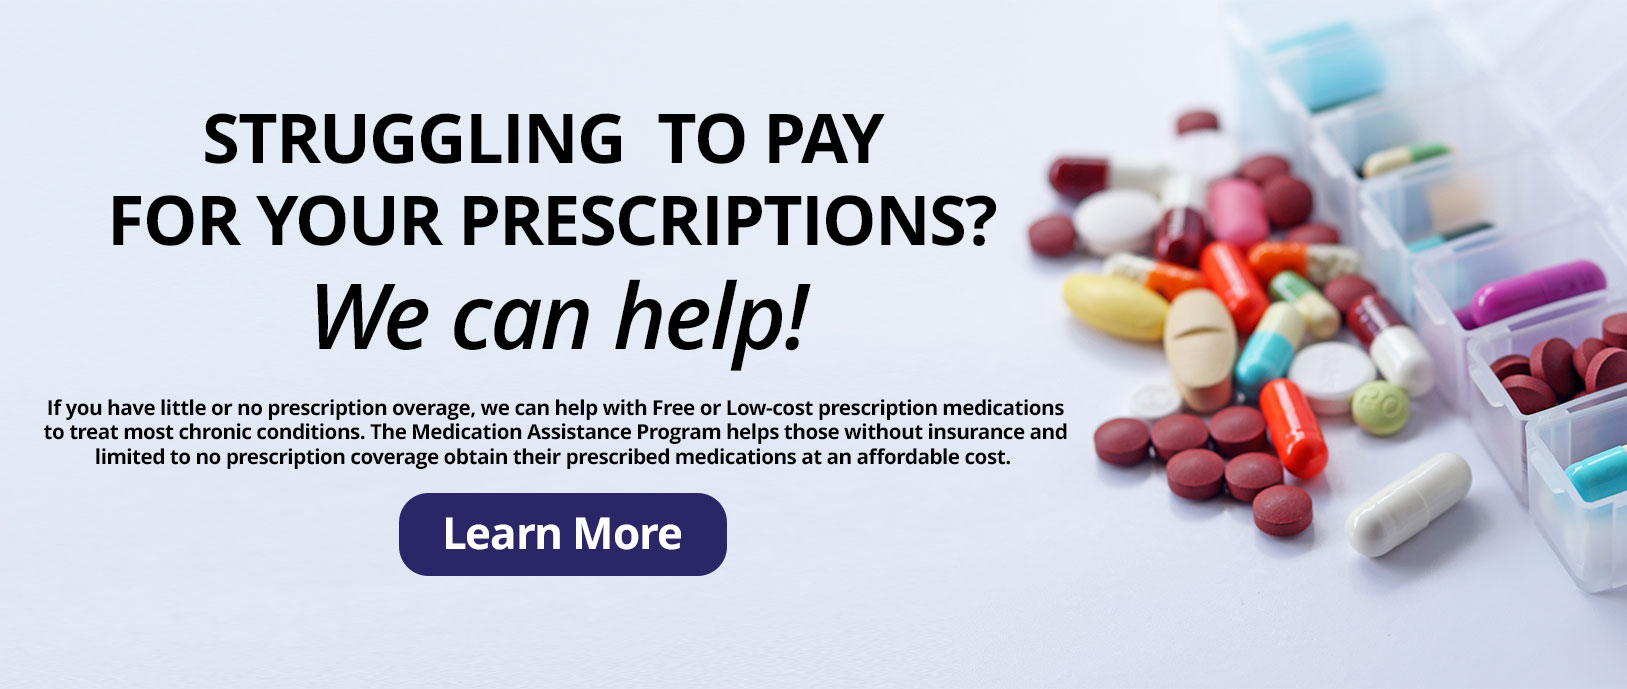 Struggling  to pay for your prescriptions?

We can help!

If you have little or no prescription overage, we can help with Free or Low-cost prescription medications to treat most chronic conditions. The Medication Assistance Program helps those without insurance andlimited to no prescription coverage obtain their prescribed medications at an affordable cost.